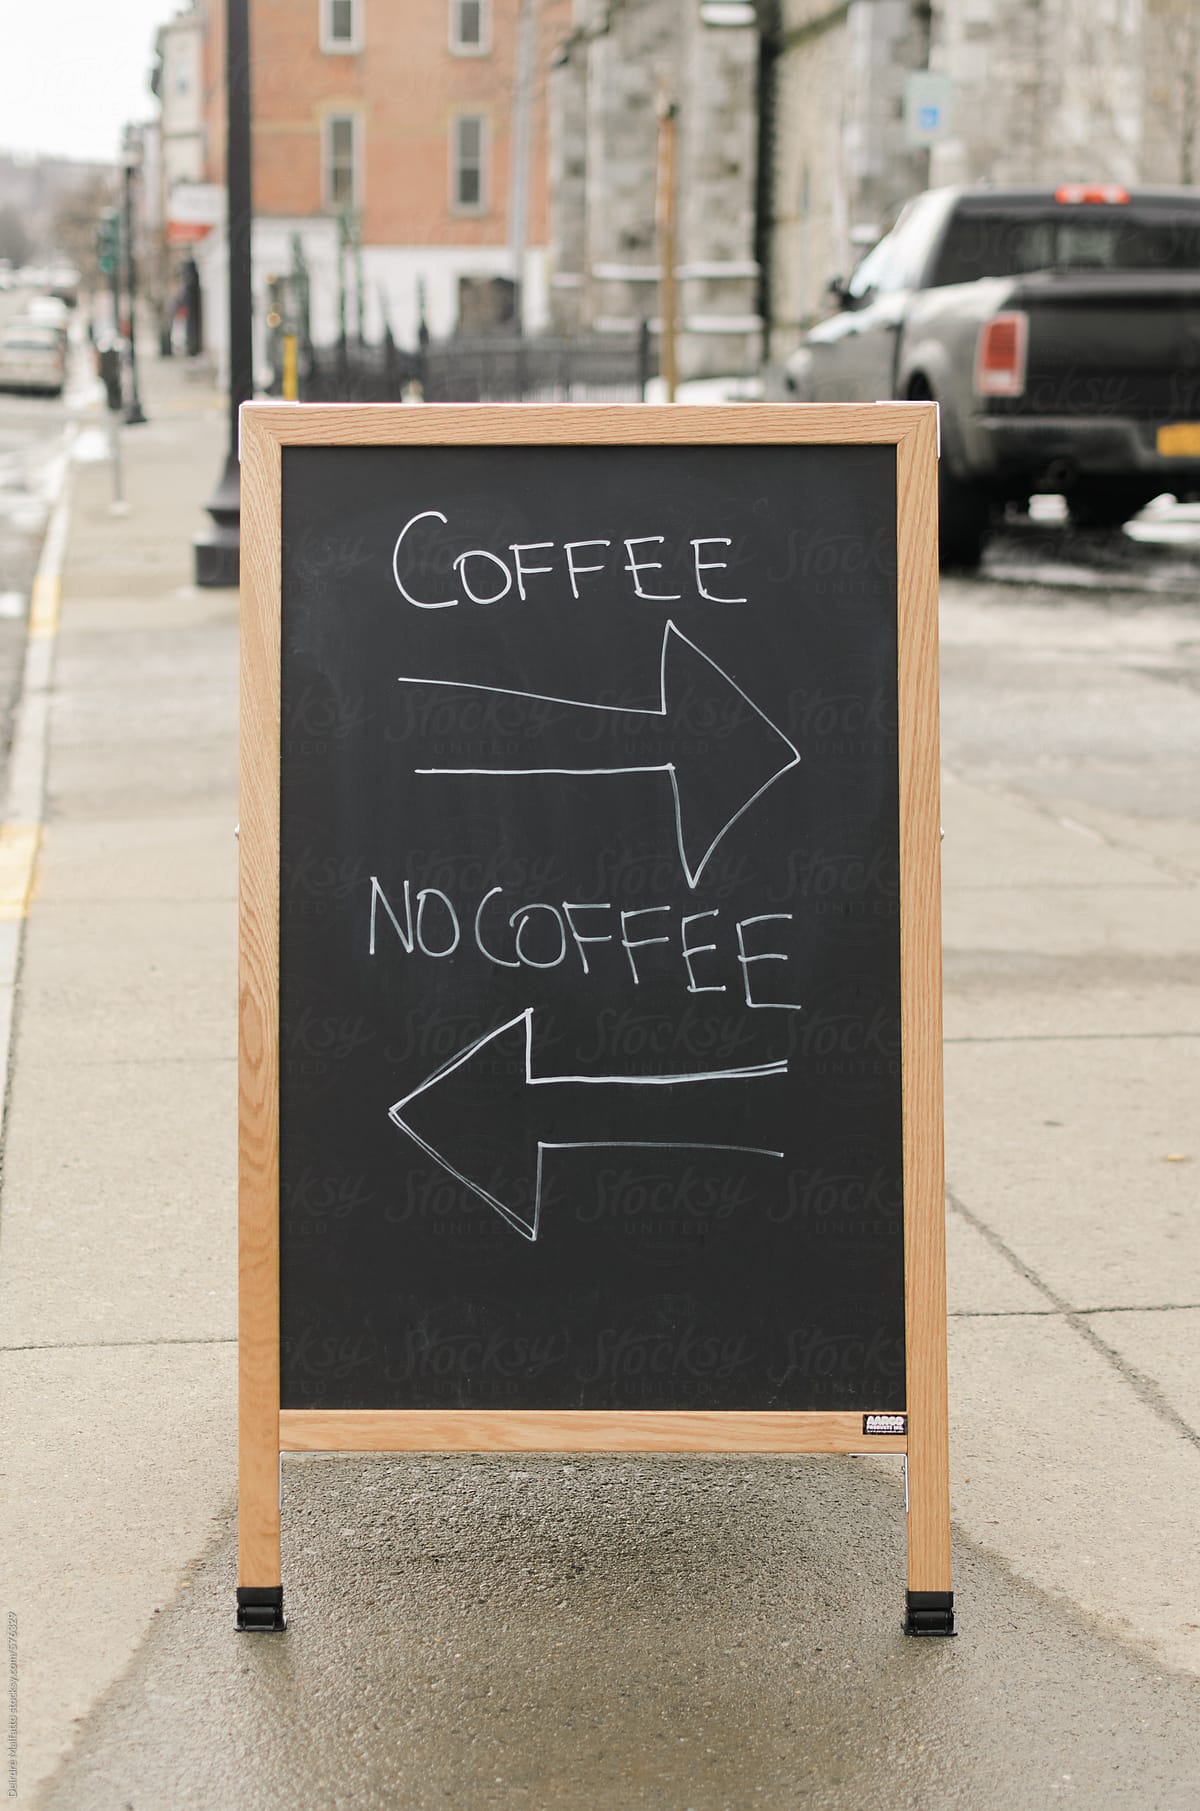 chalkboard sign gives choice of coffee or no coffee